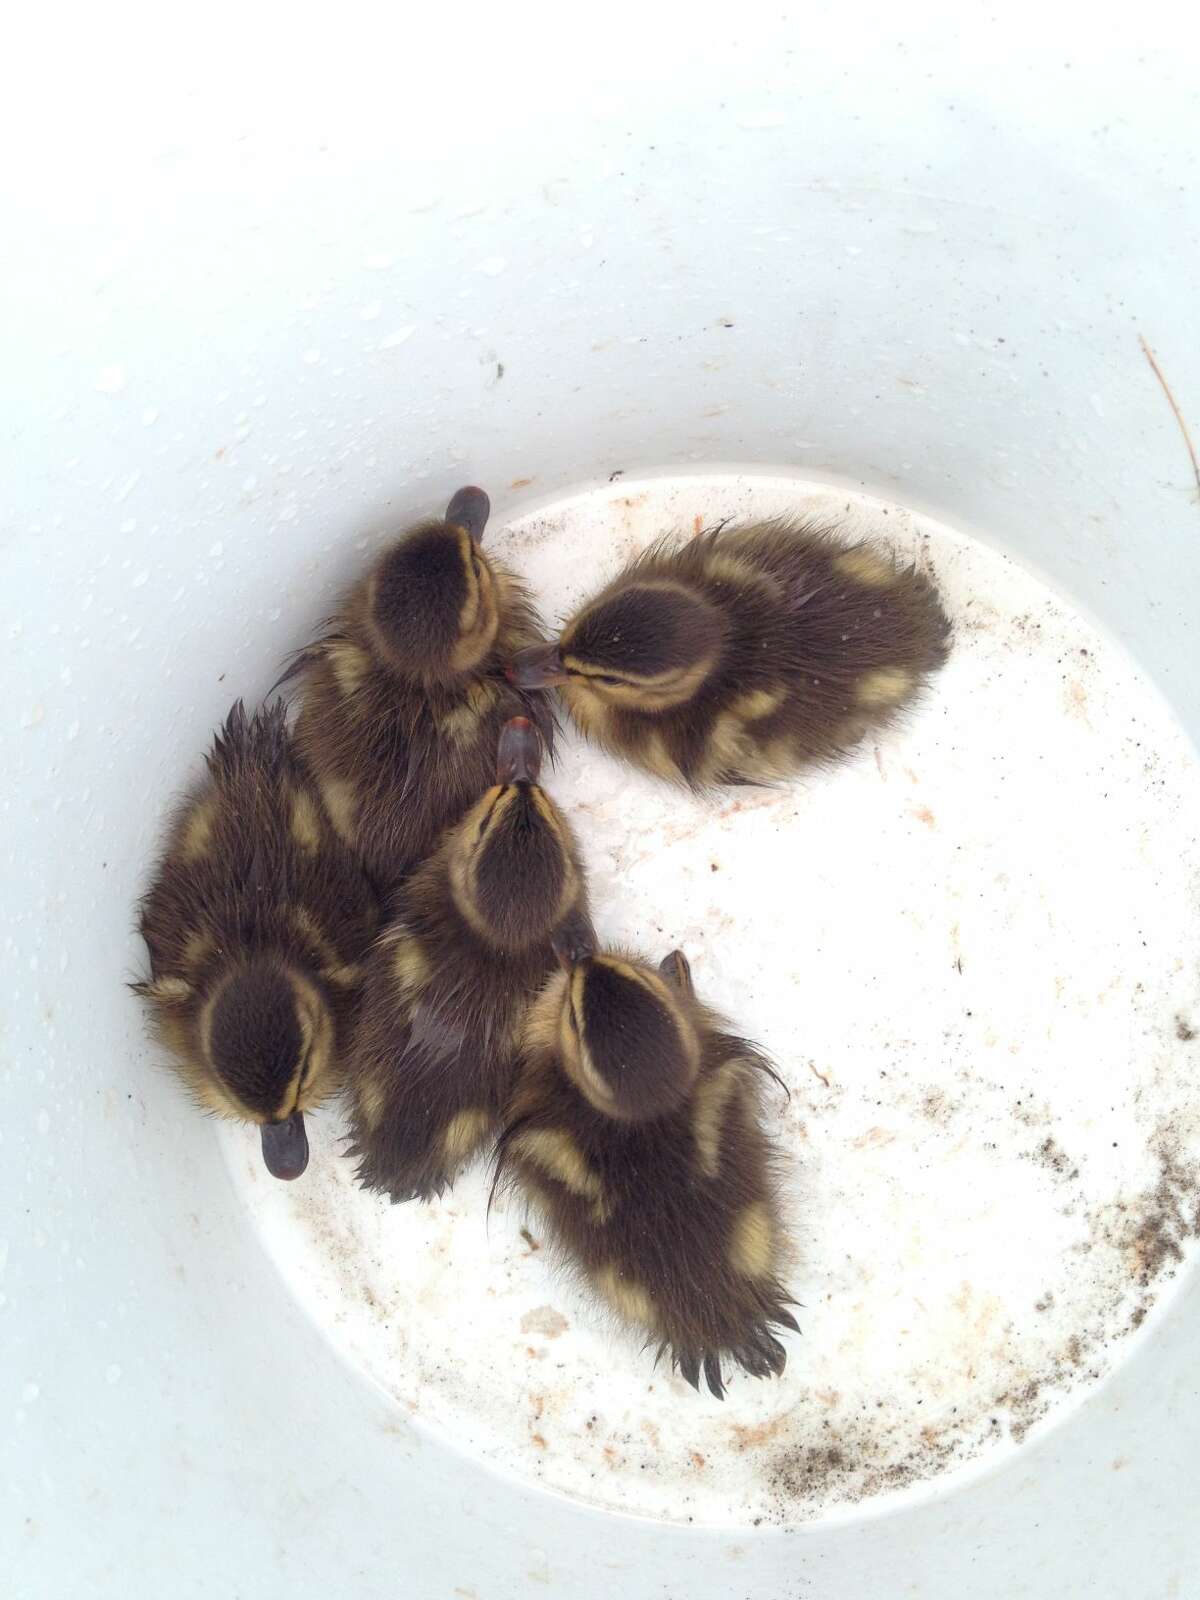 Westport Fire personnel saved five Mallard chicks from a storm drain on Tuesday morning.